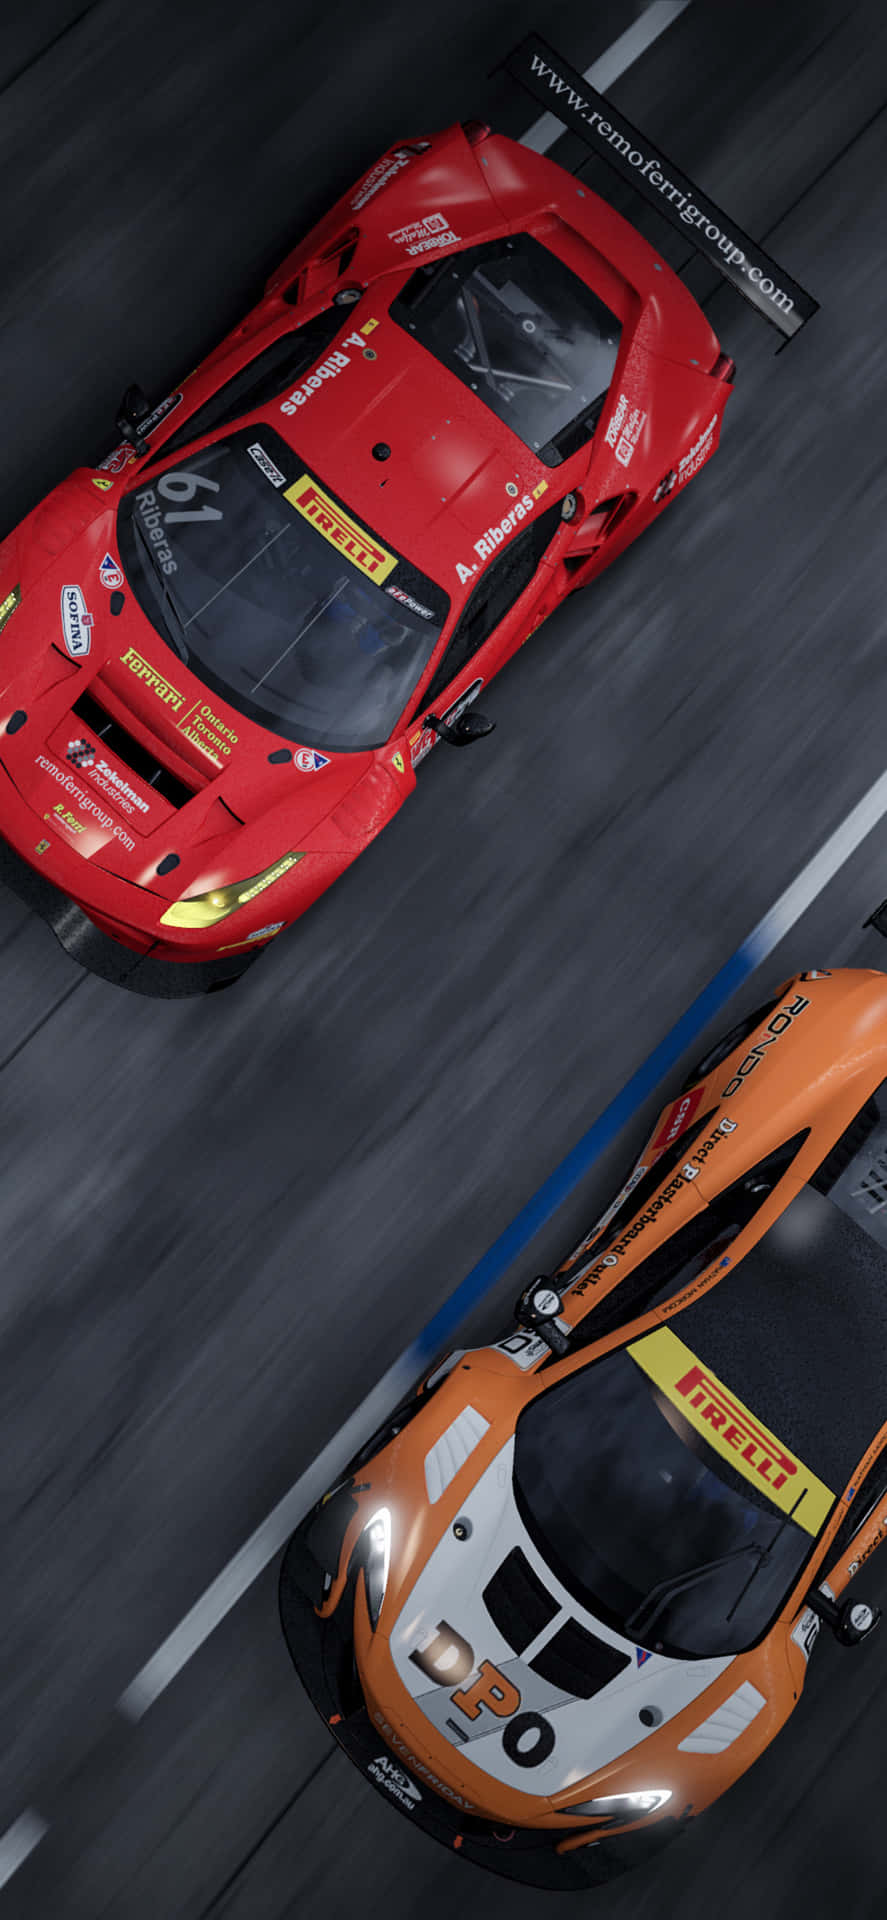 Iphone Xs Max Project Cars 2 Red And Orange Race Cars Background